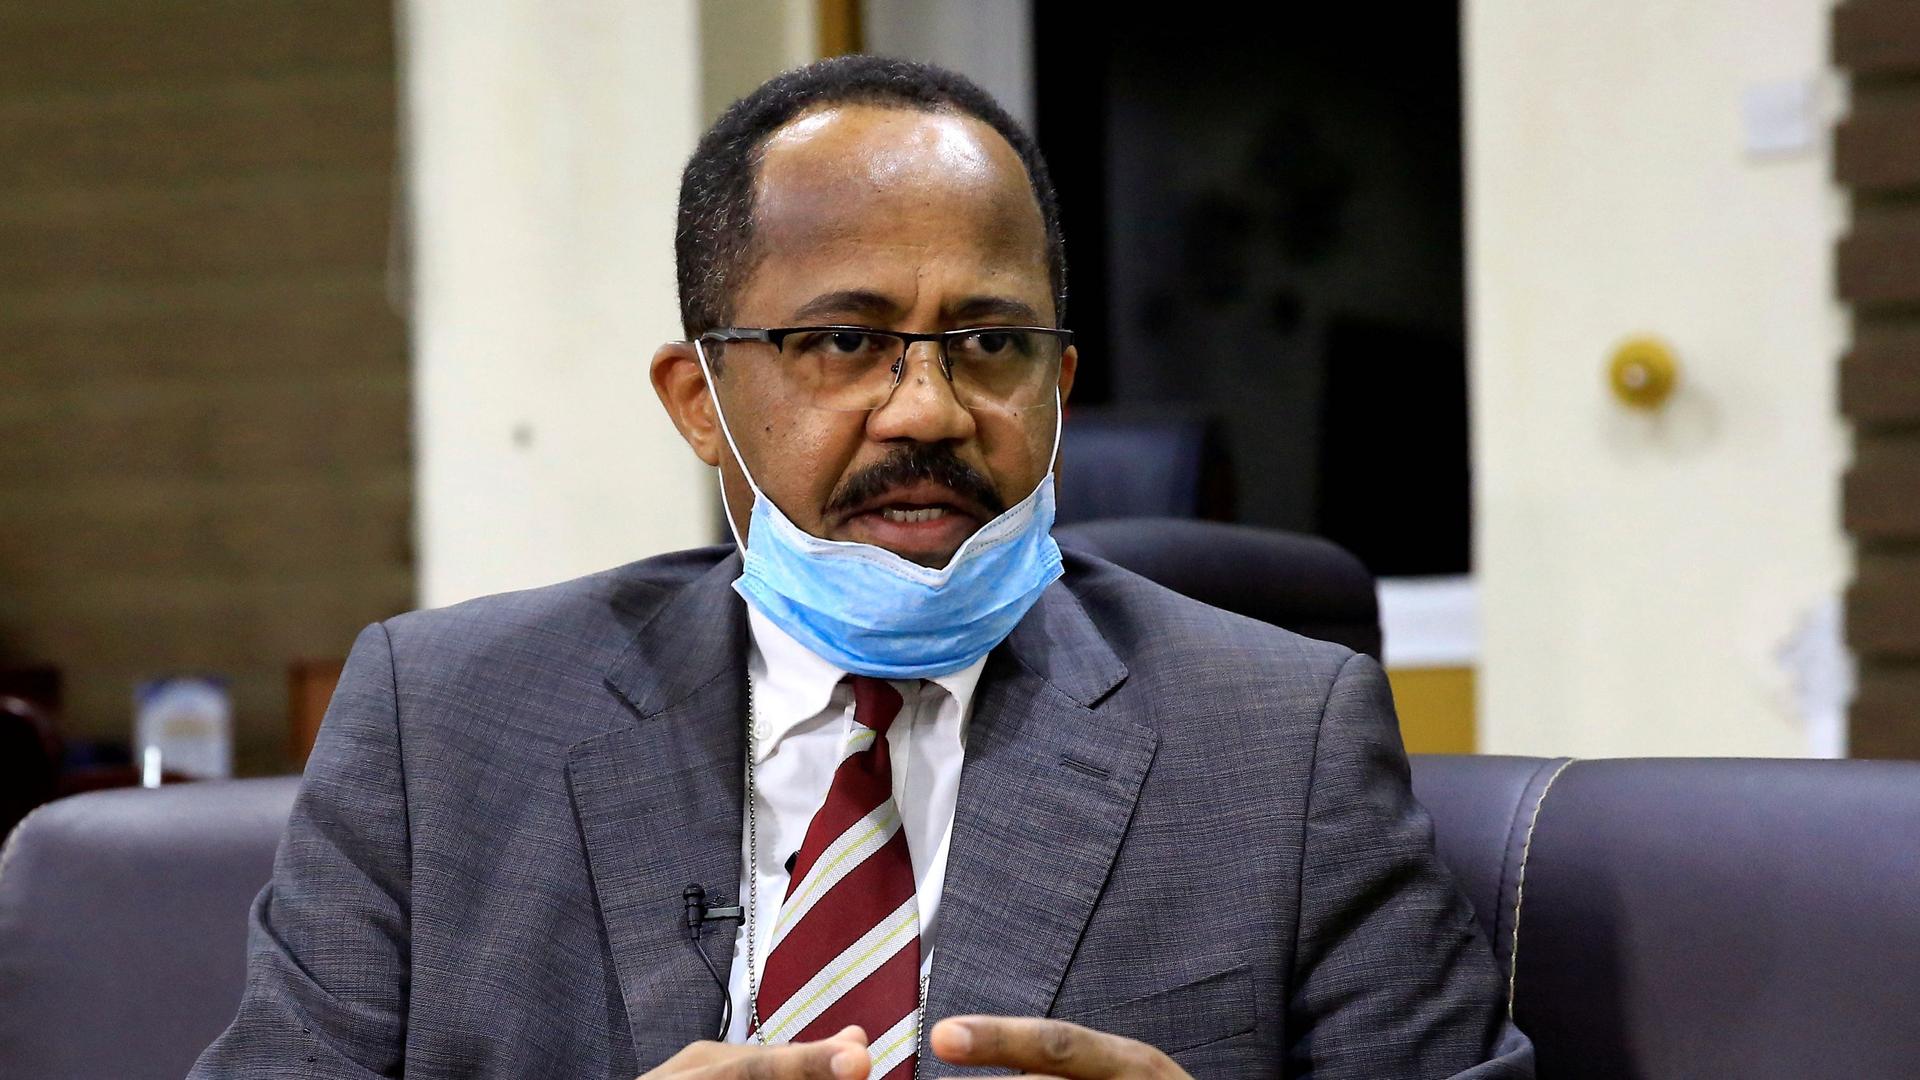 Sudan's Minister of Health Akram Ali Altom speaks during a Reuters interview amid concerns about the spread of coronavirus disease (COVID-19), in Khartoum, Sudan, April 11, 2020. 